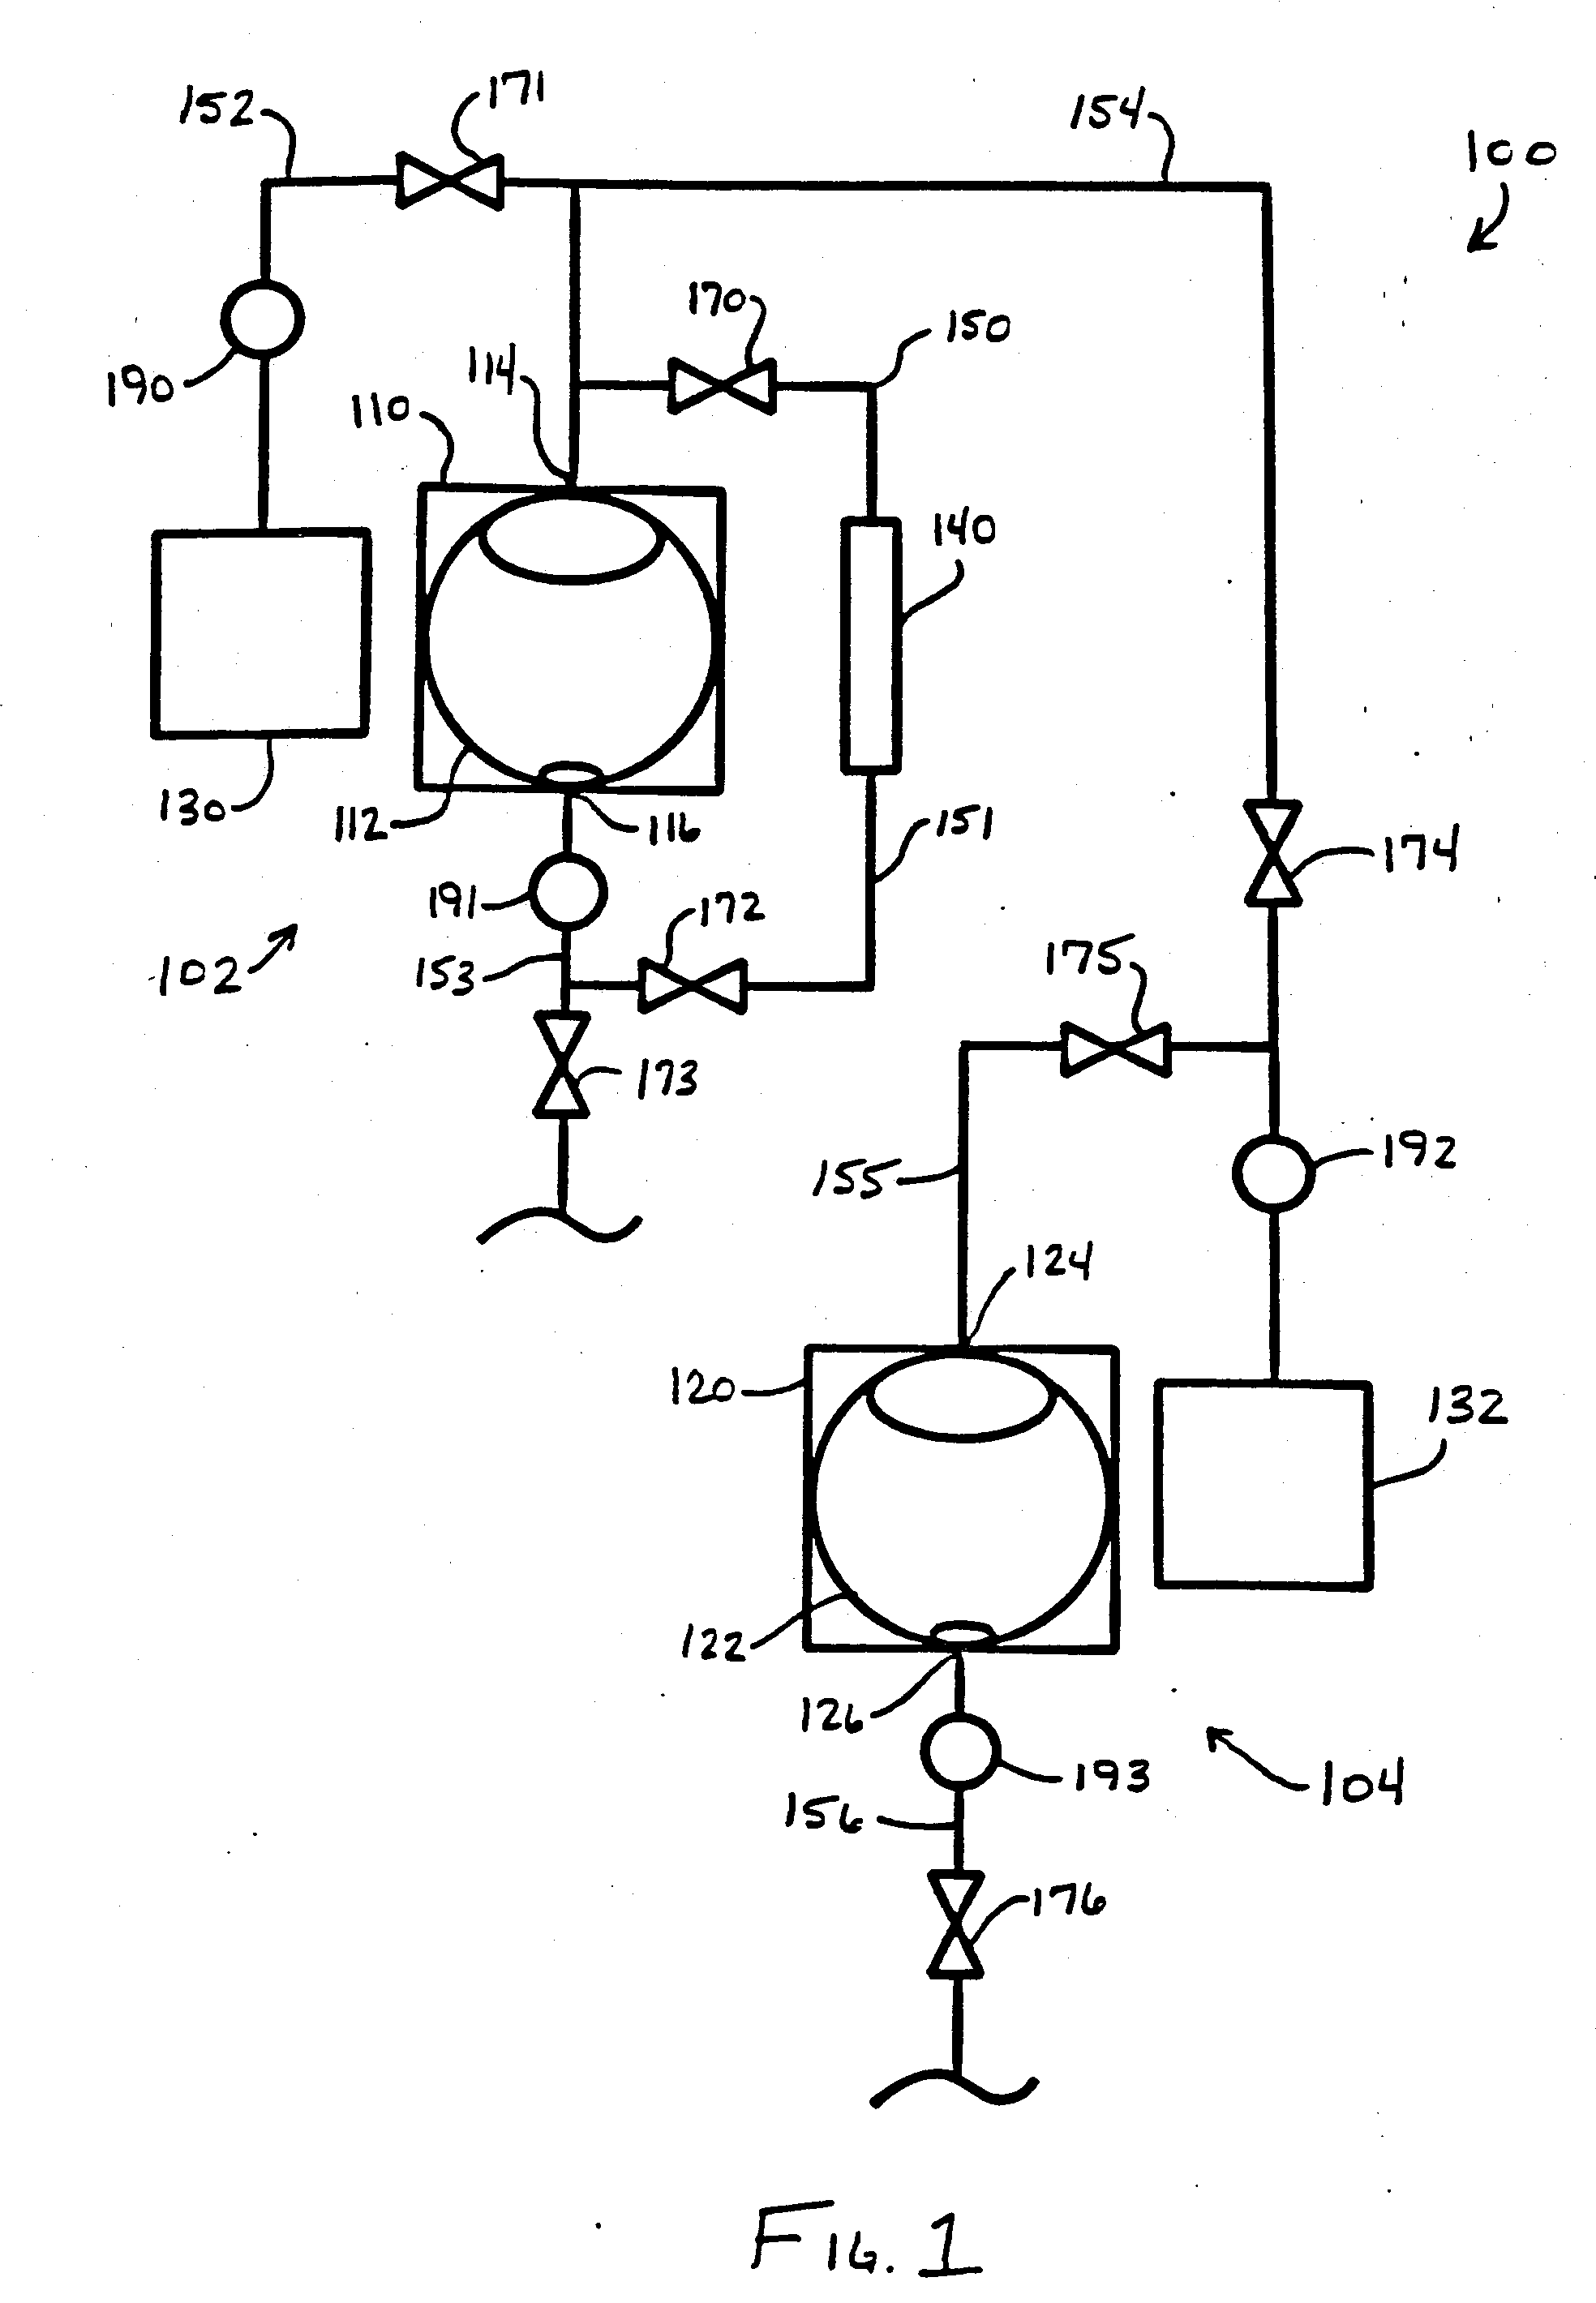 Cleaning system utilizing an organic and a pressurized fluid solvent